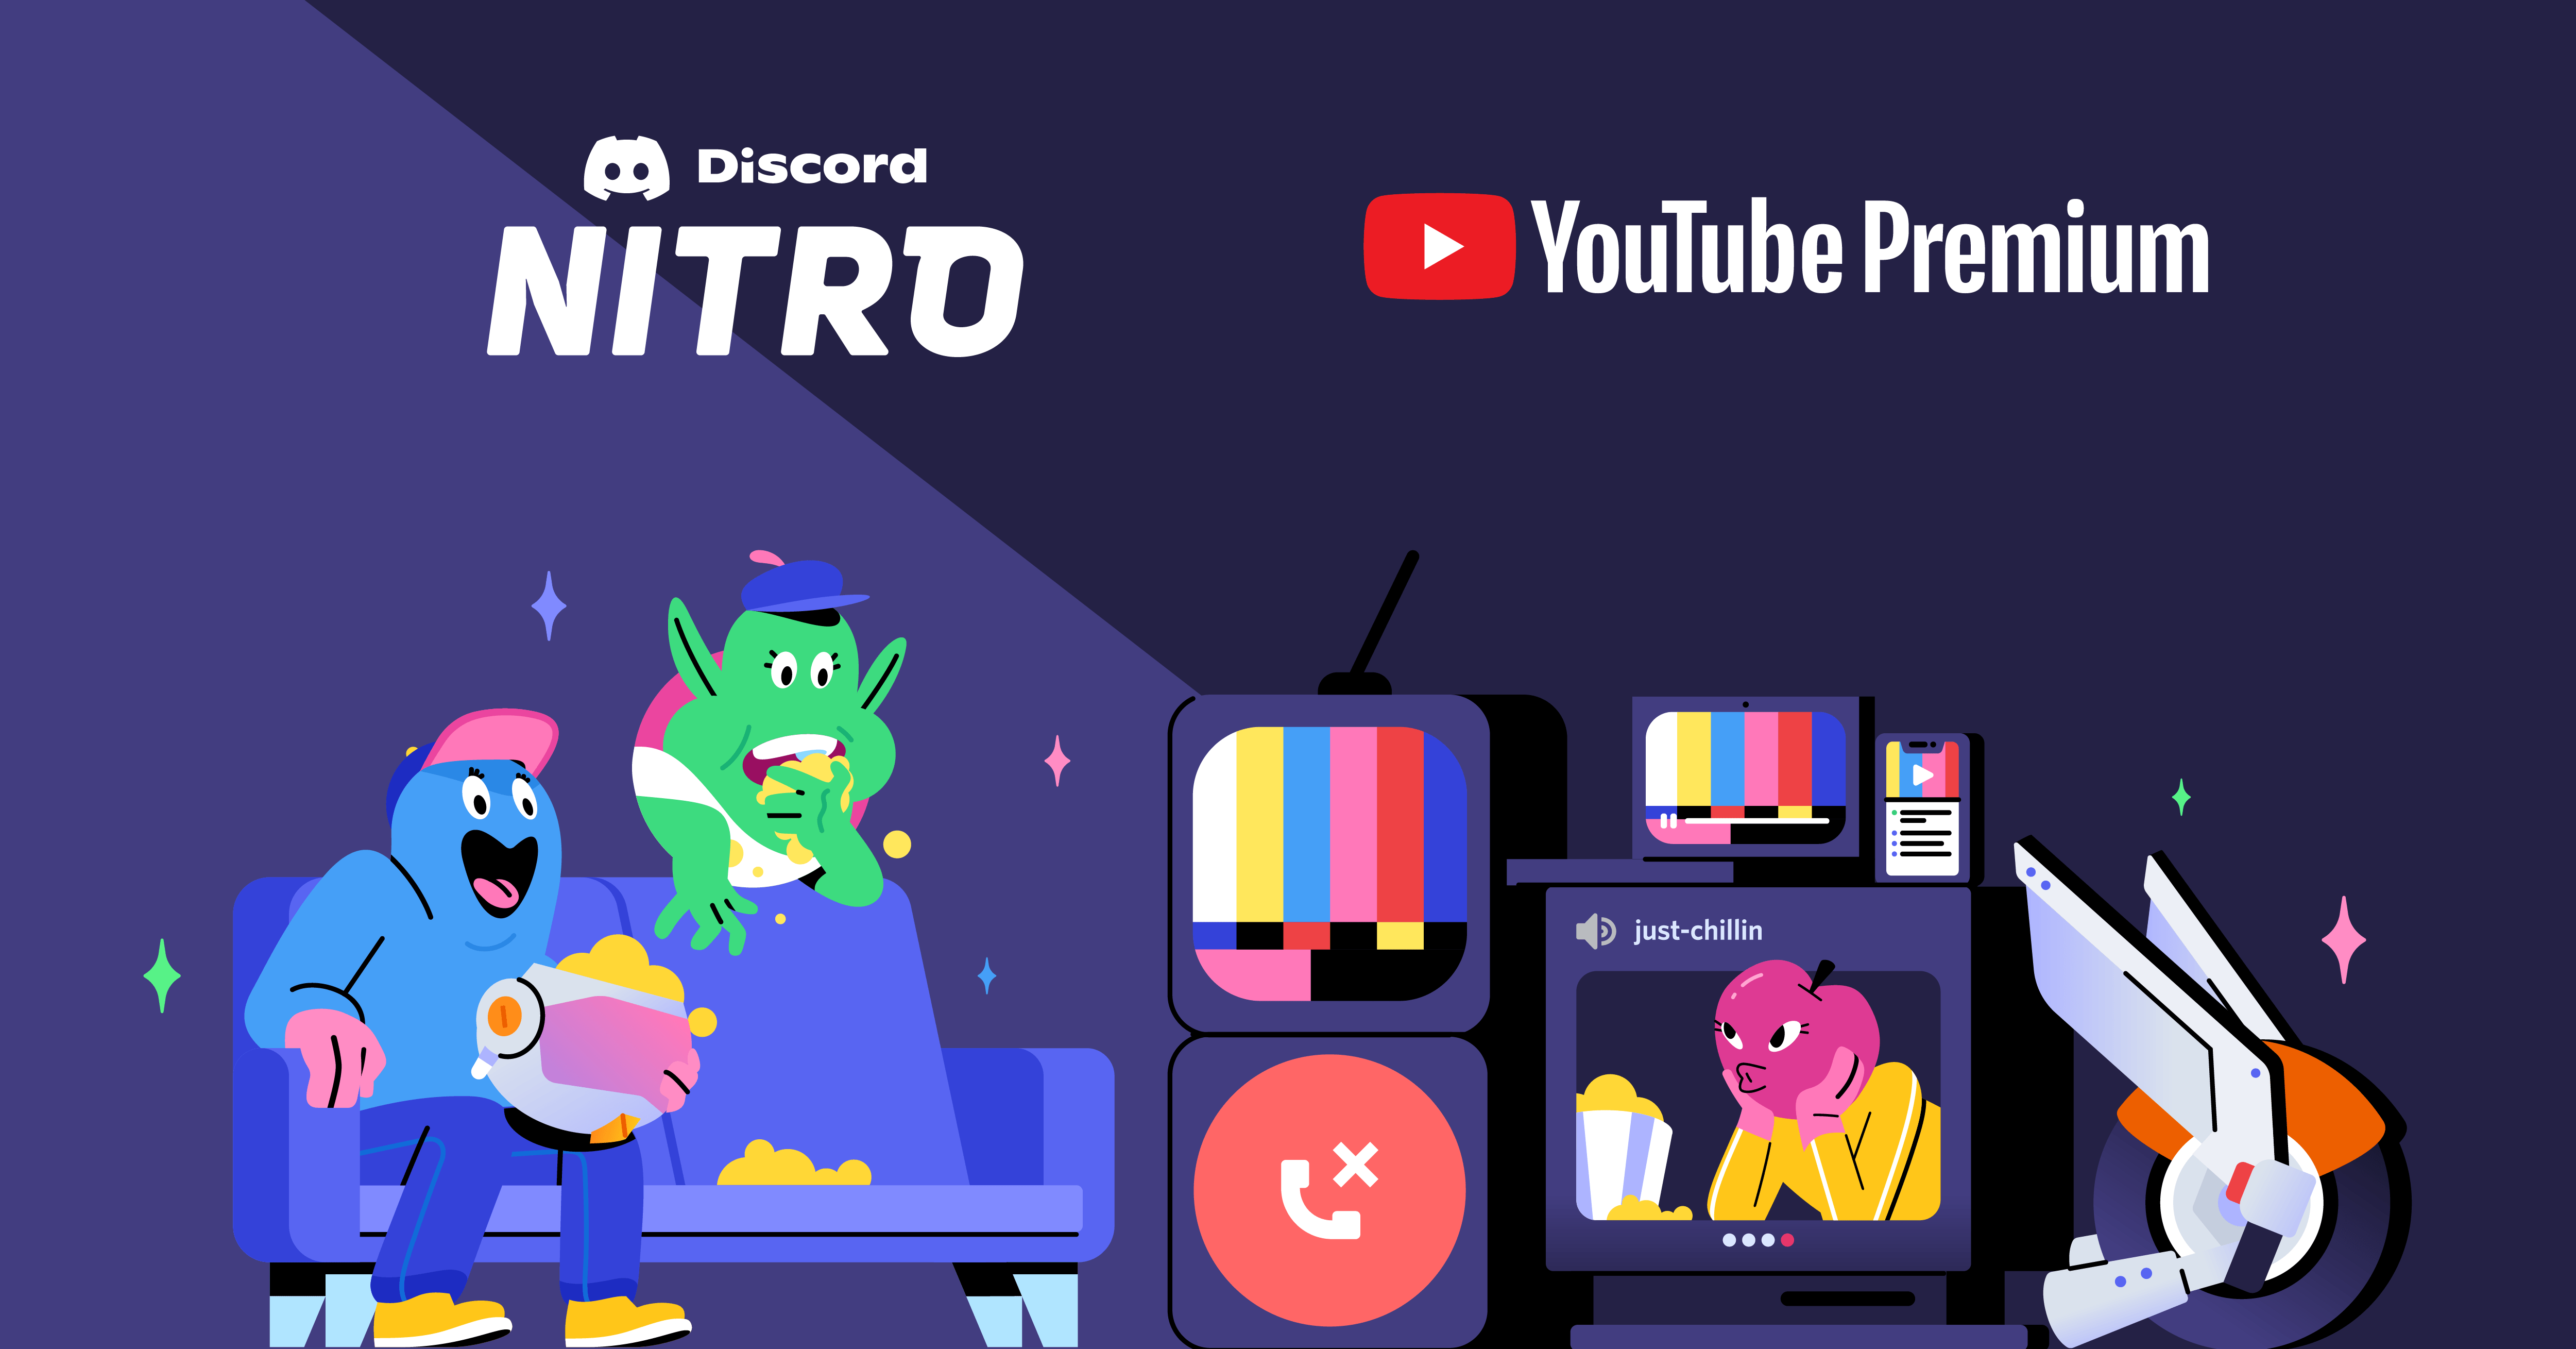 YouTube Premium and Discord Nitro are Partnering to Offer Free 3-Month Trials